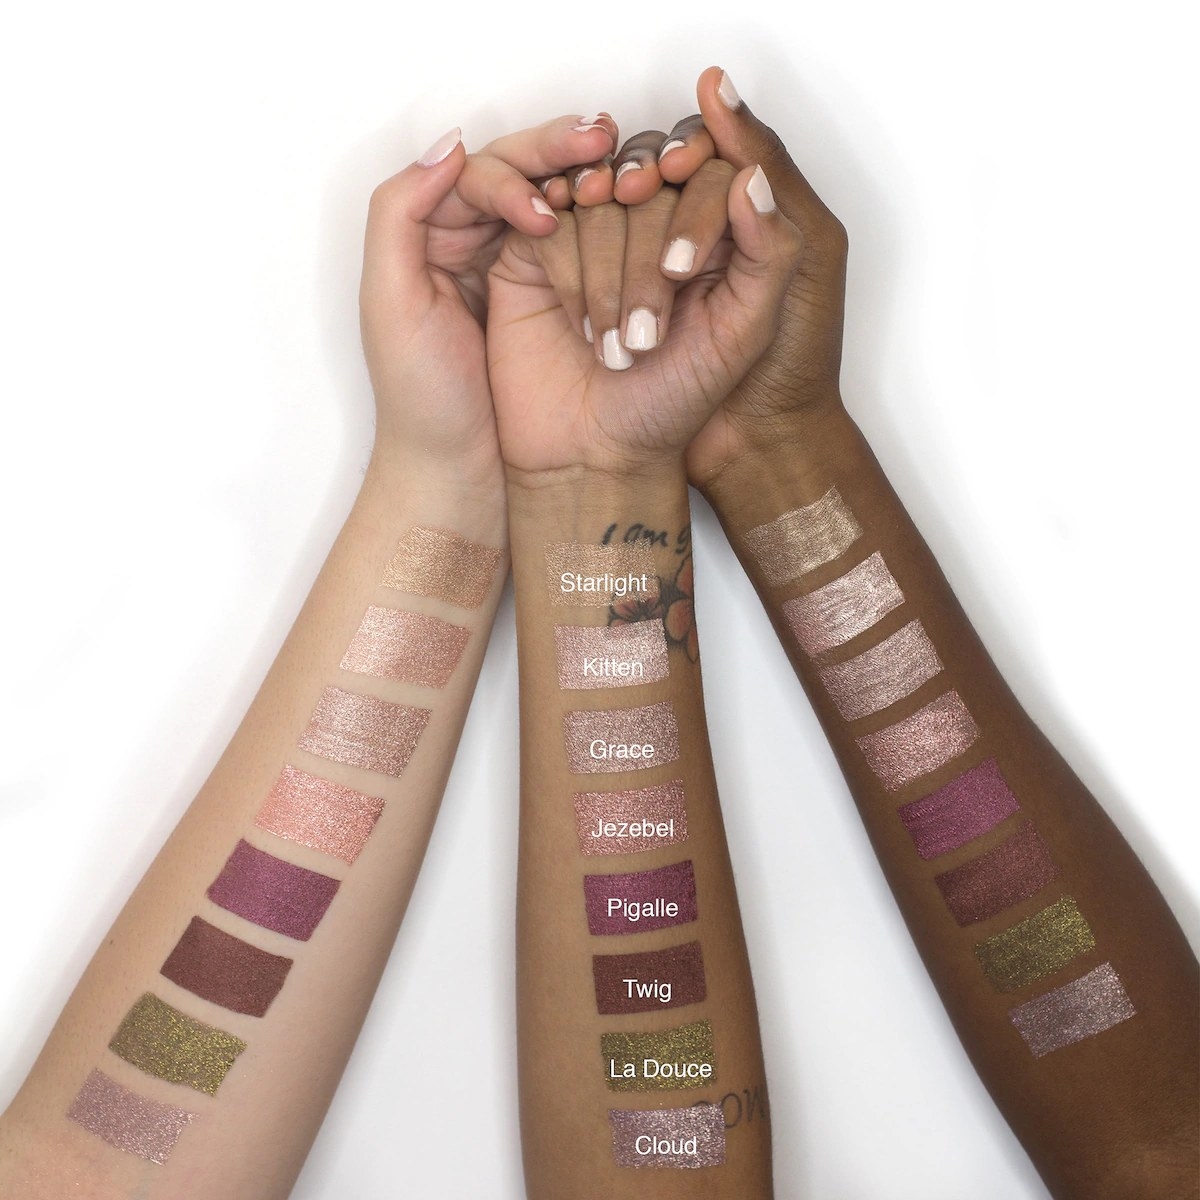 Models with different skin tones showing off all of the liquid eyeshadow shades on their forearms